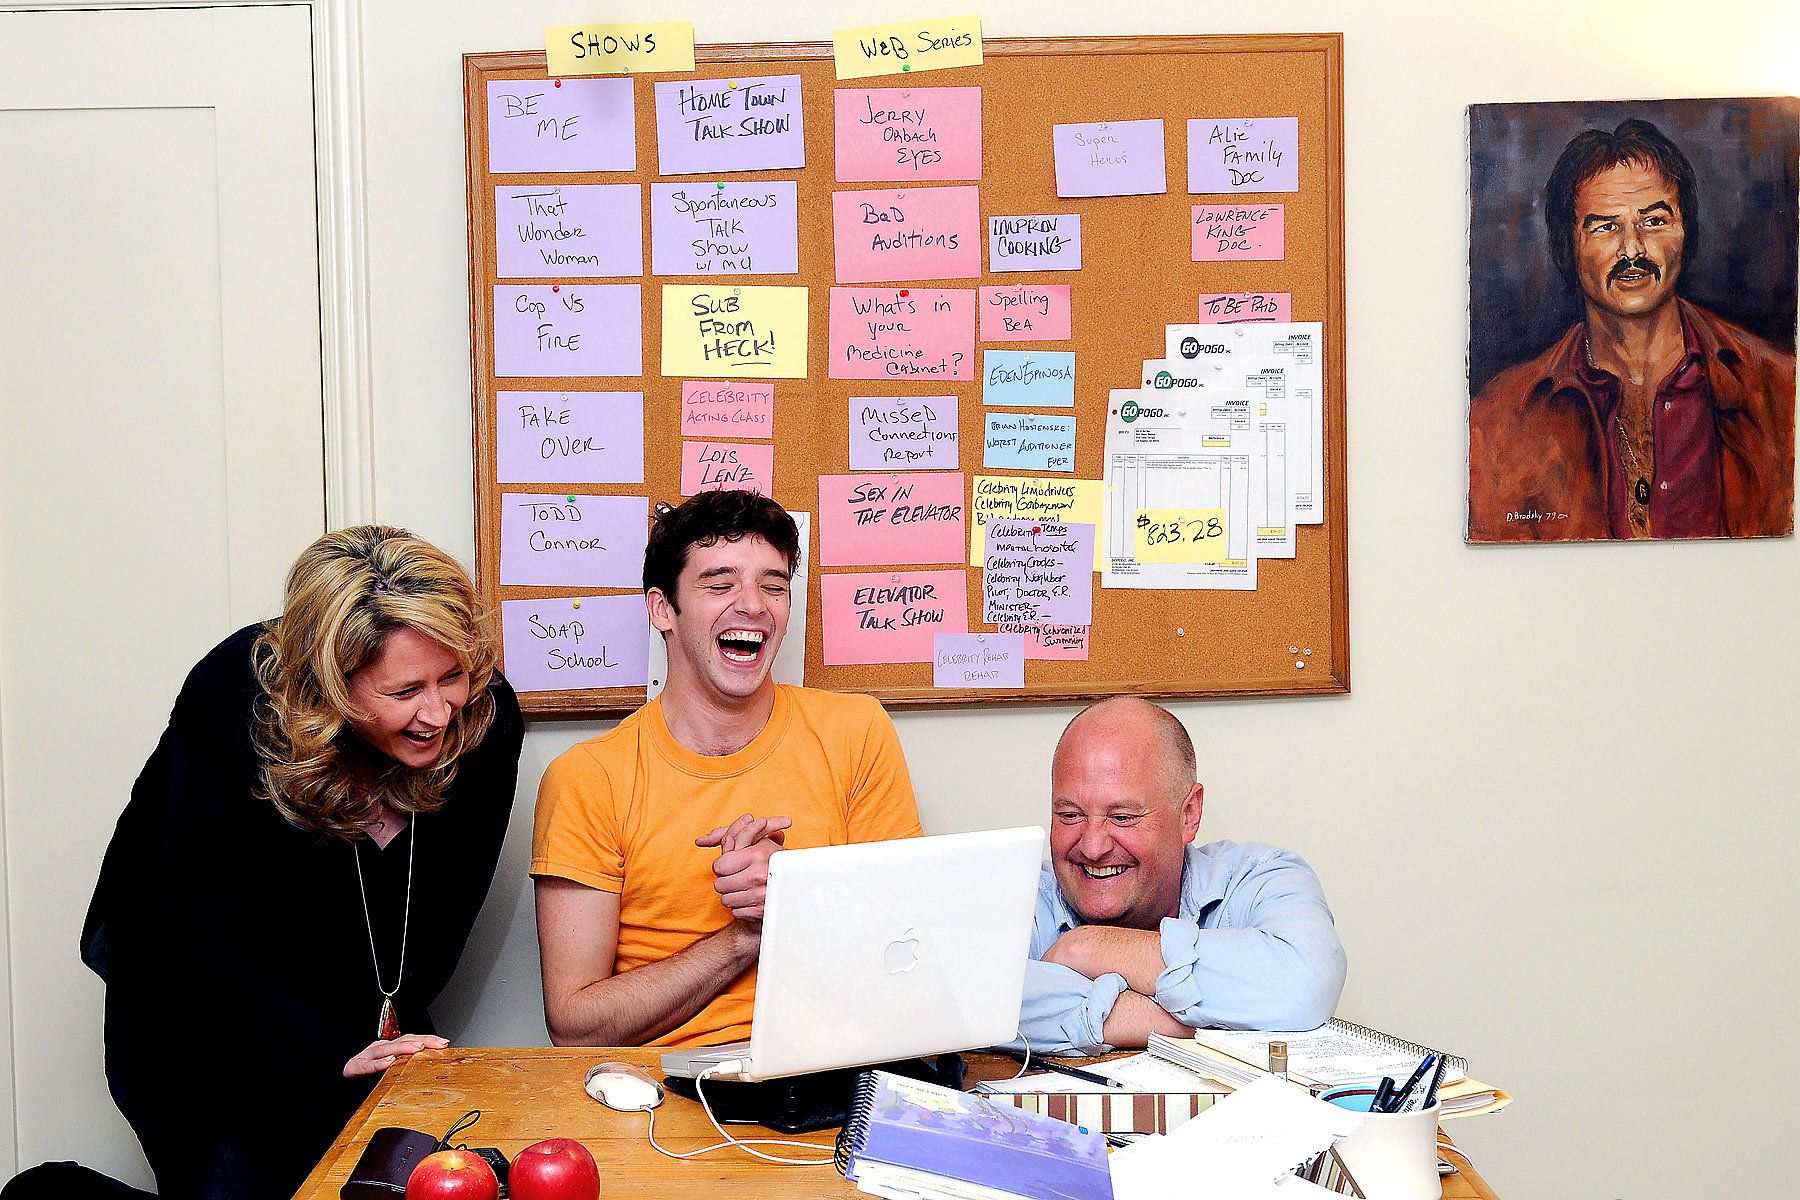 Michael Urie and his production company associates look over TV pilot ideas during "A day in the life of Michael Urie" shot for TV Guide  Magazine